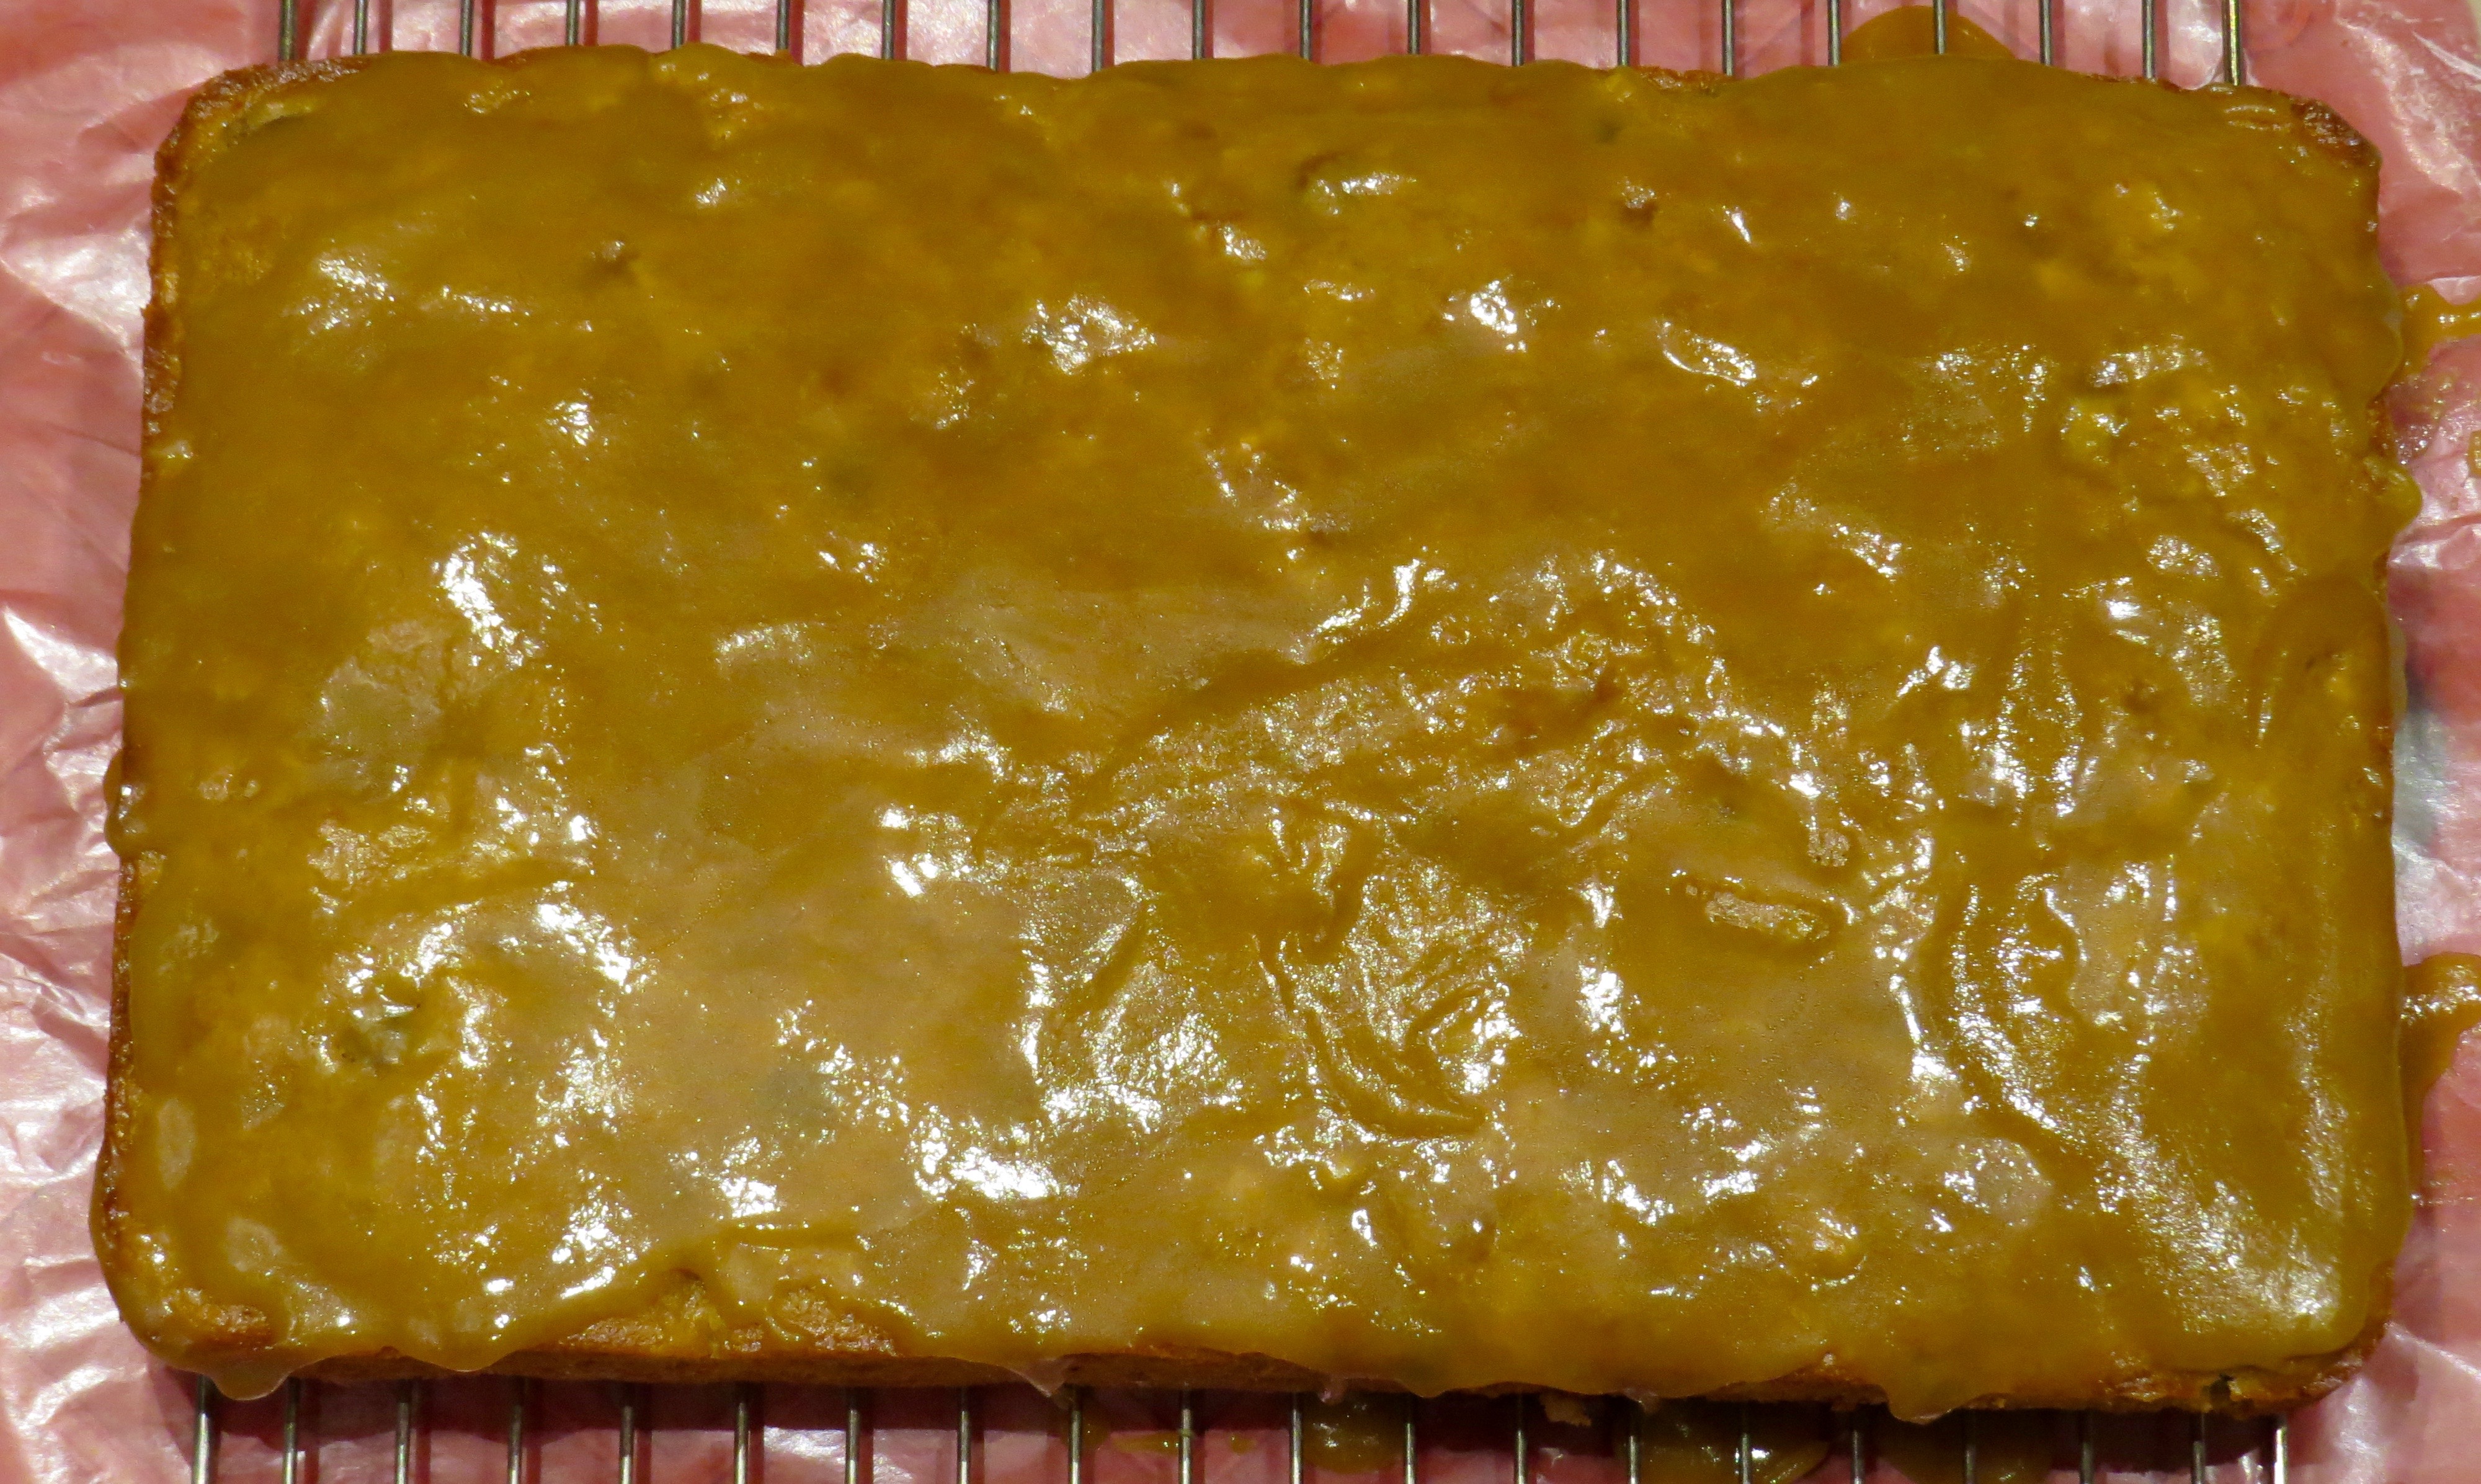 After spreading with the brown-sugar glaze,  it's time to cut them into bars. 